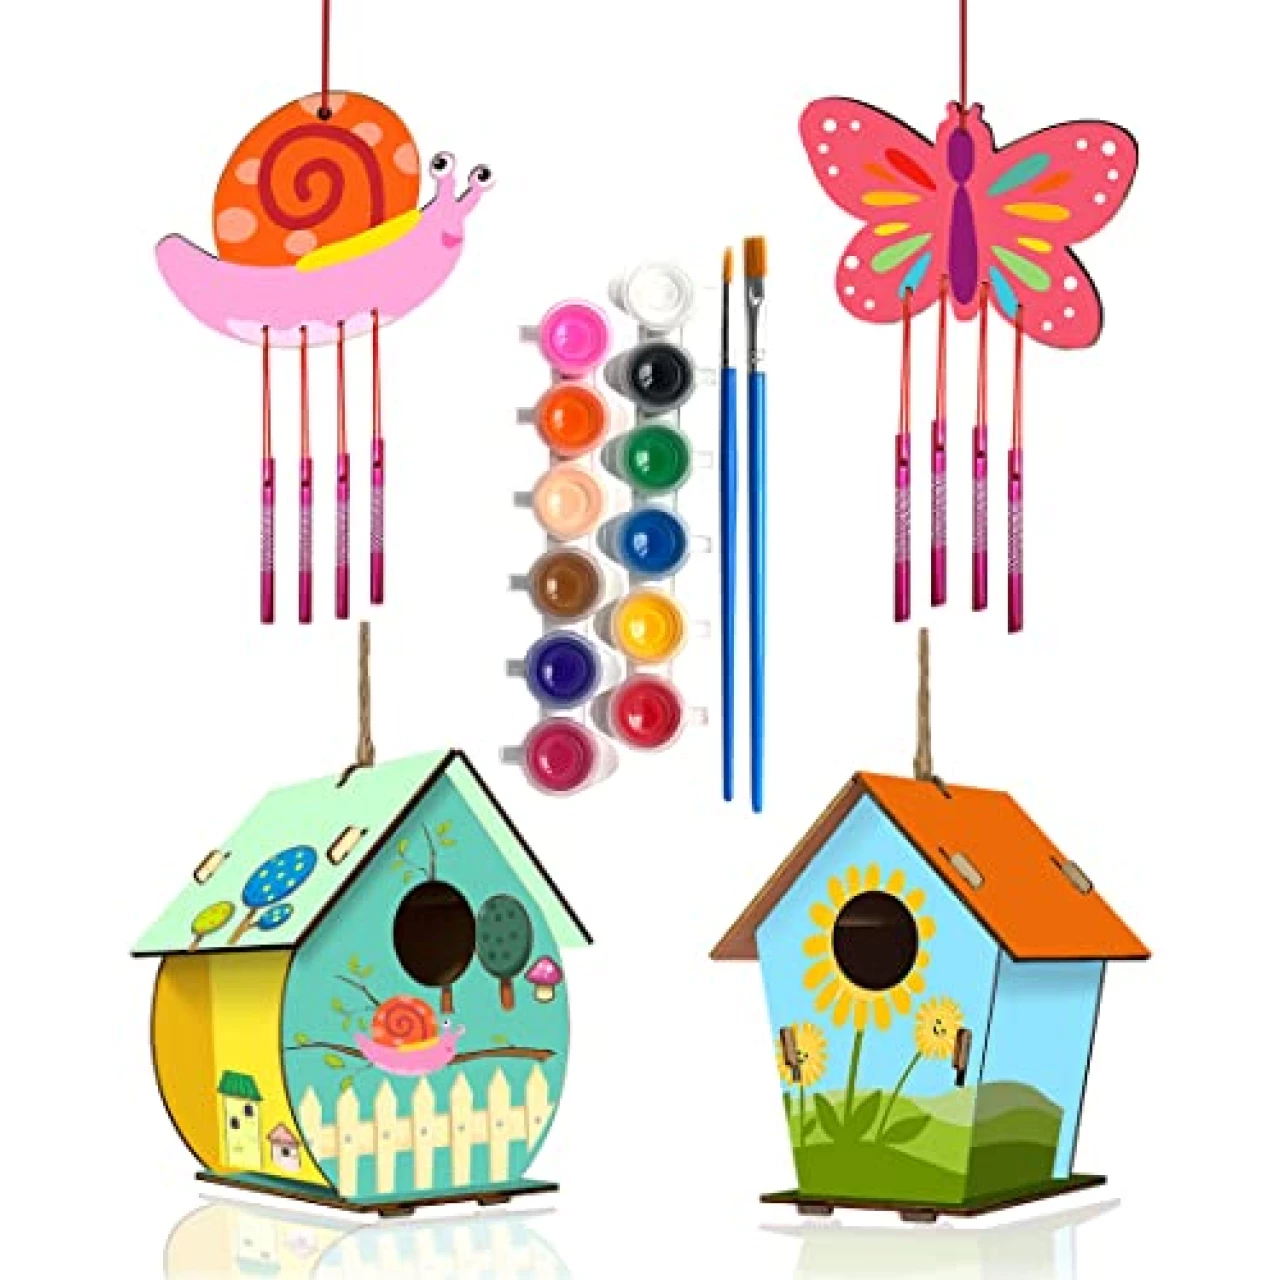 HOME COMPOSER 4 Pack DIY Bird House Wind Chime Kits for Children